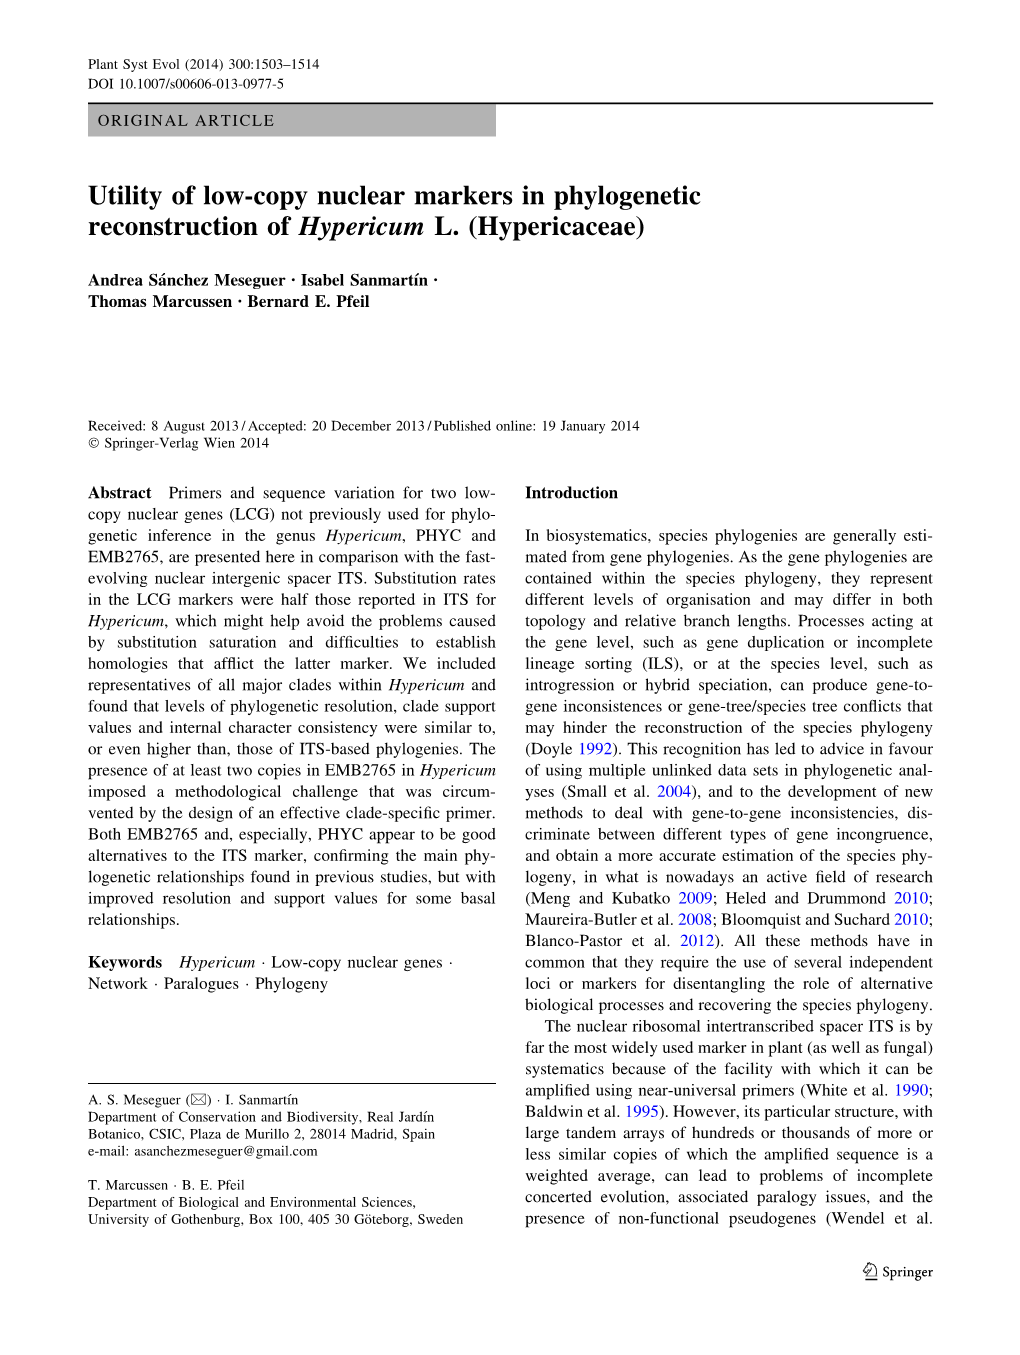 Utility of Low-Copy Nuclear Markers in Phylogenetic Reconstruction of Hypericum L